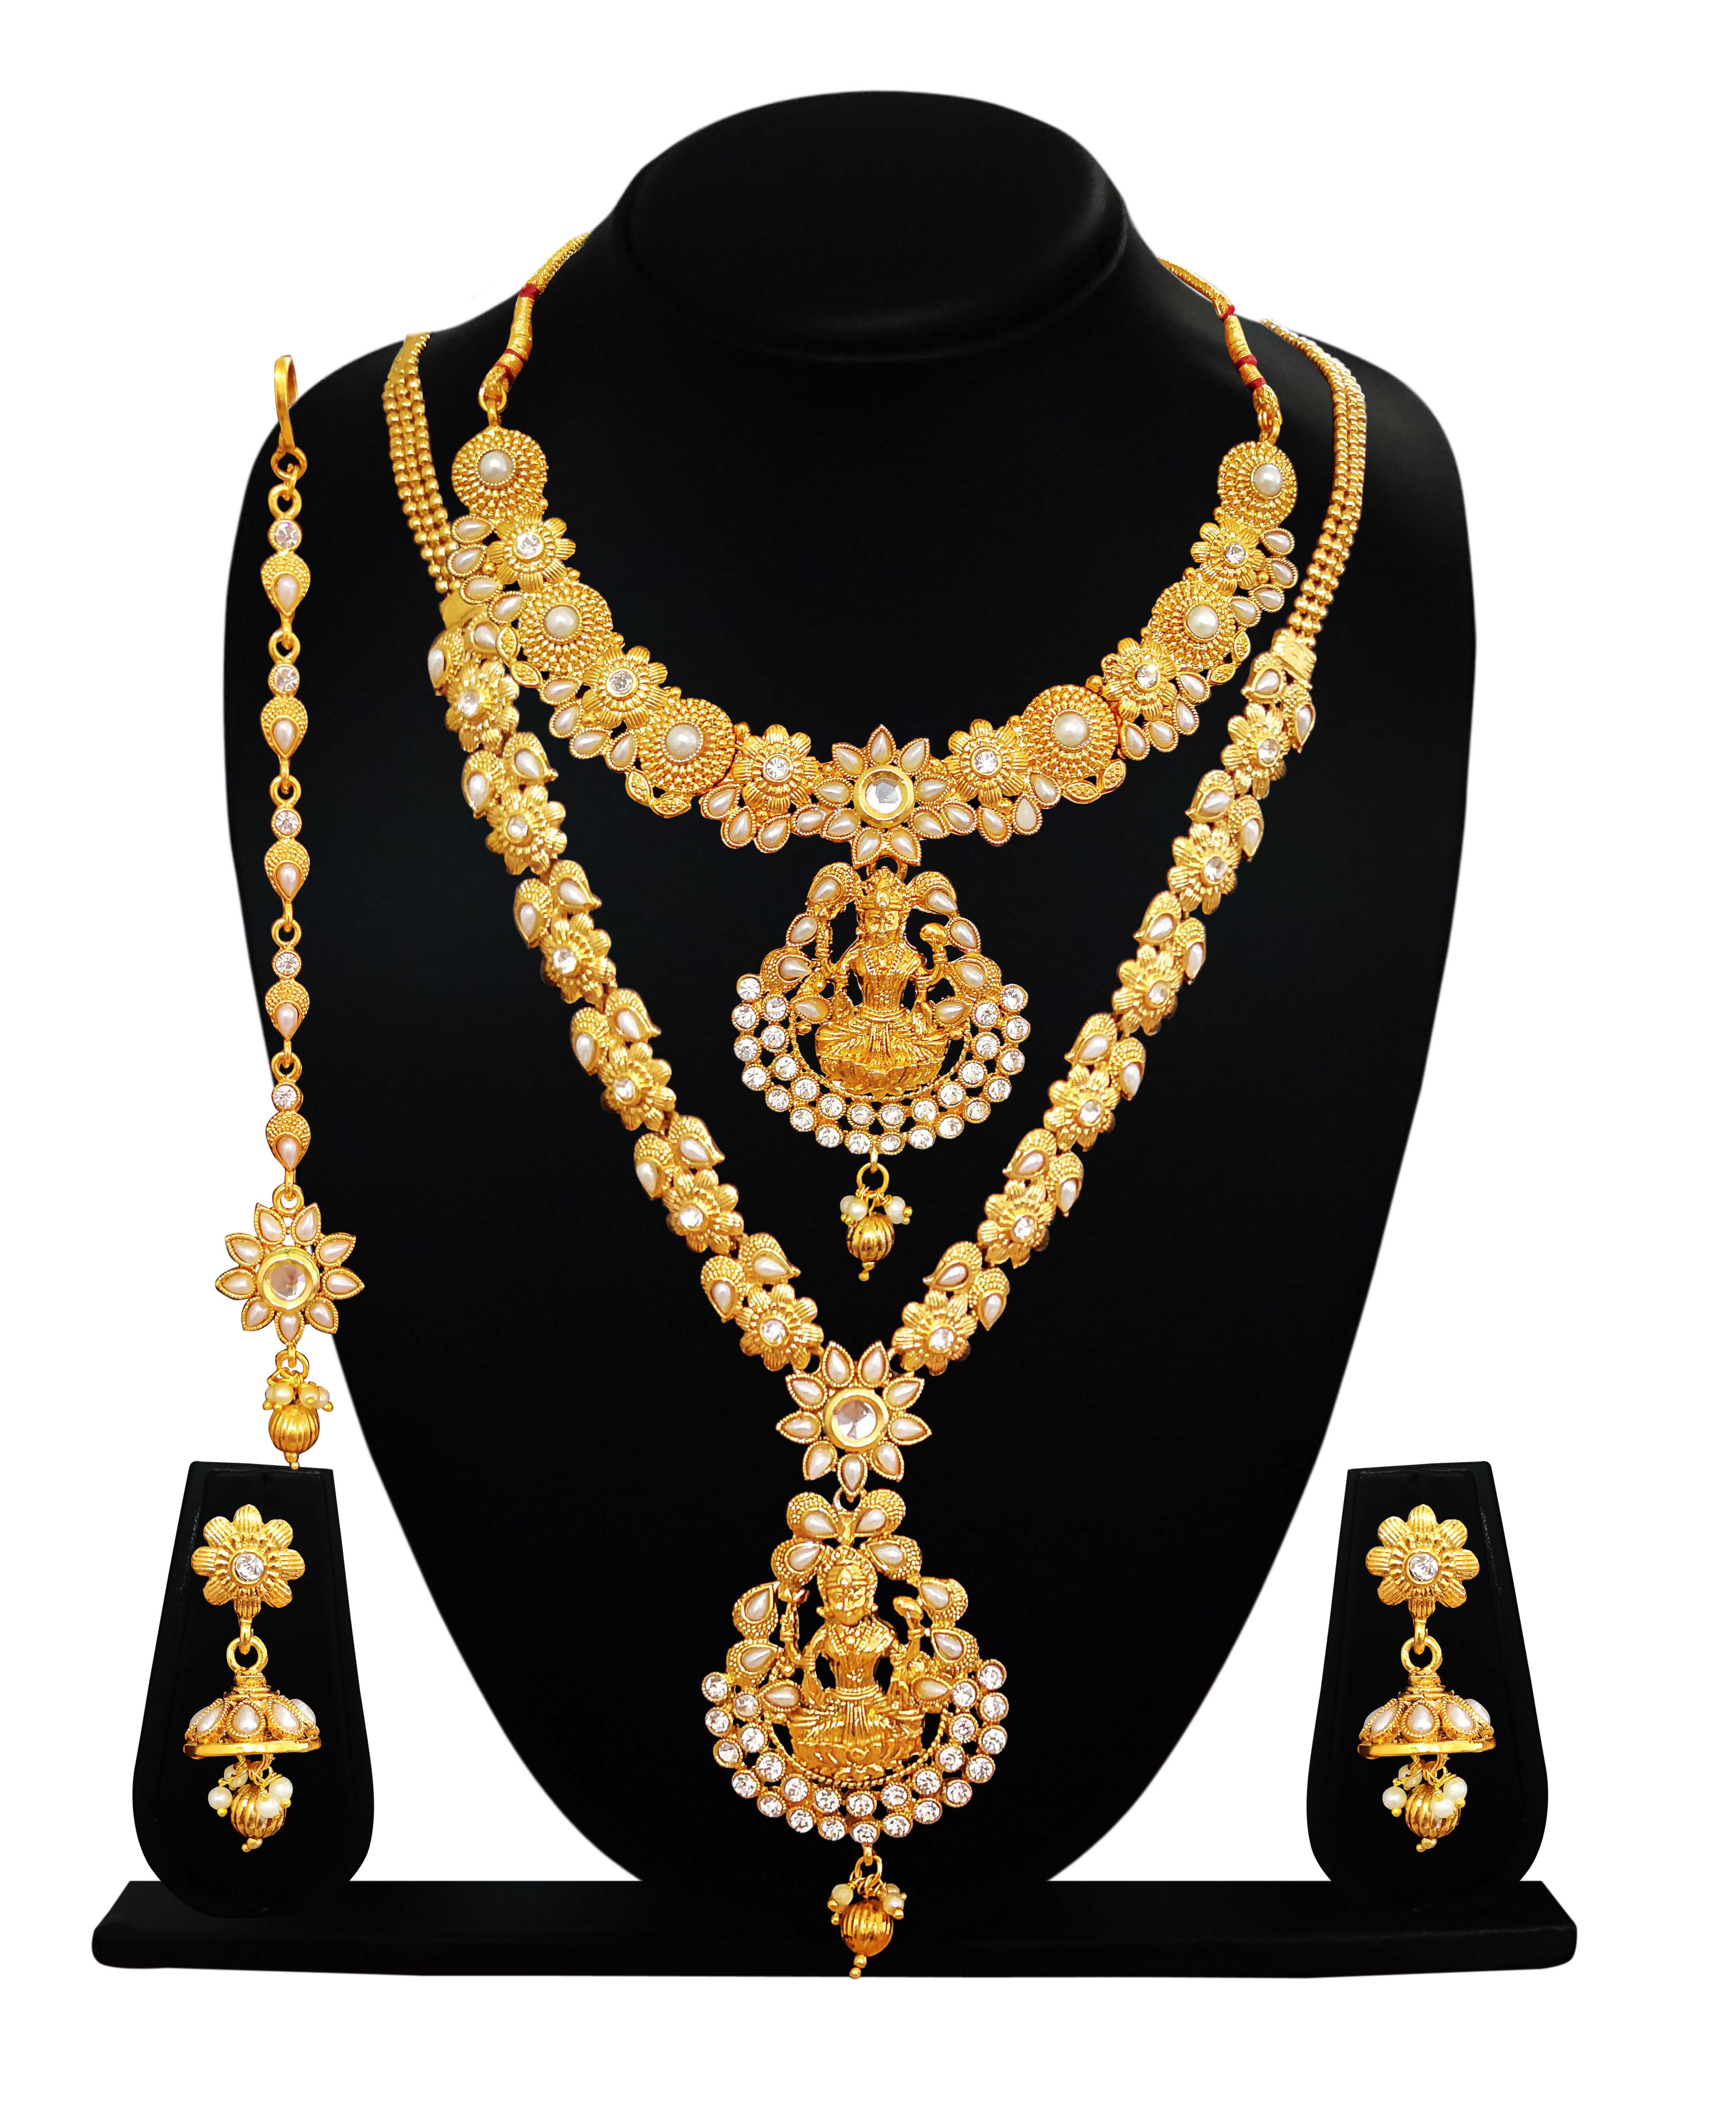 Arts Chetan Antique Gold Plated Artificial Rani Haar Double Strand Necklace Set With Earrings